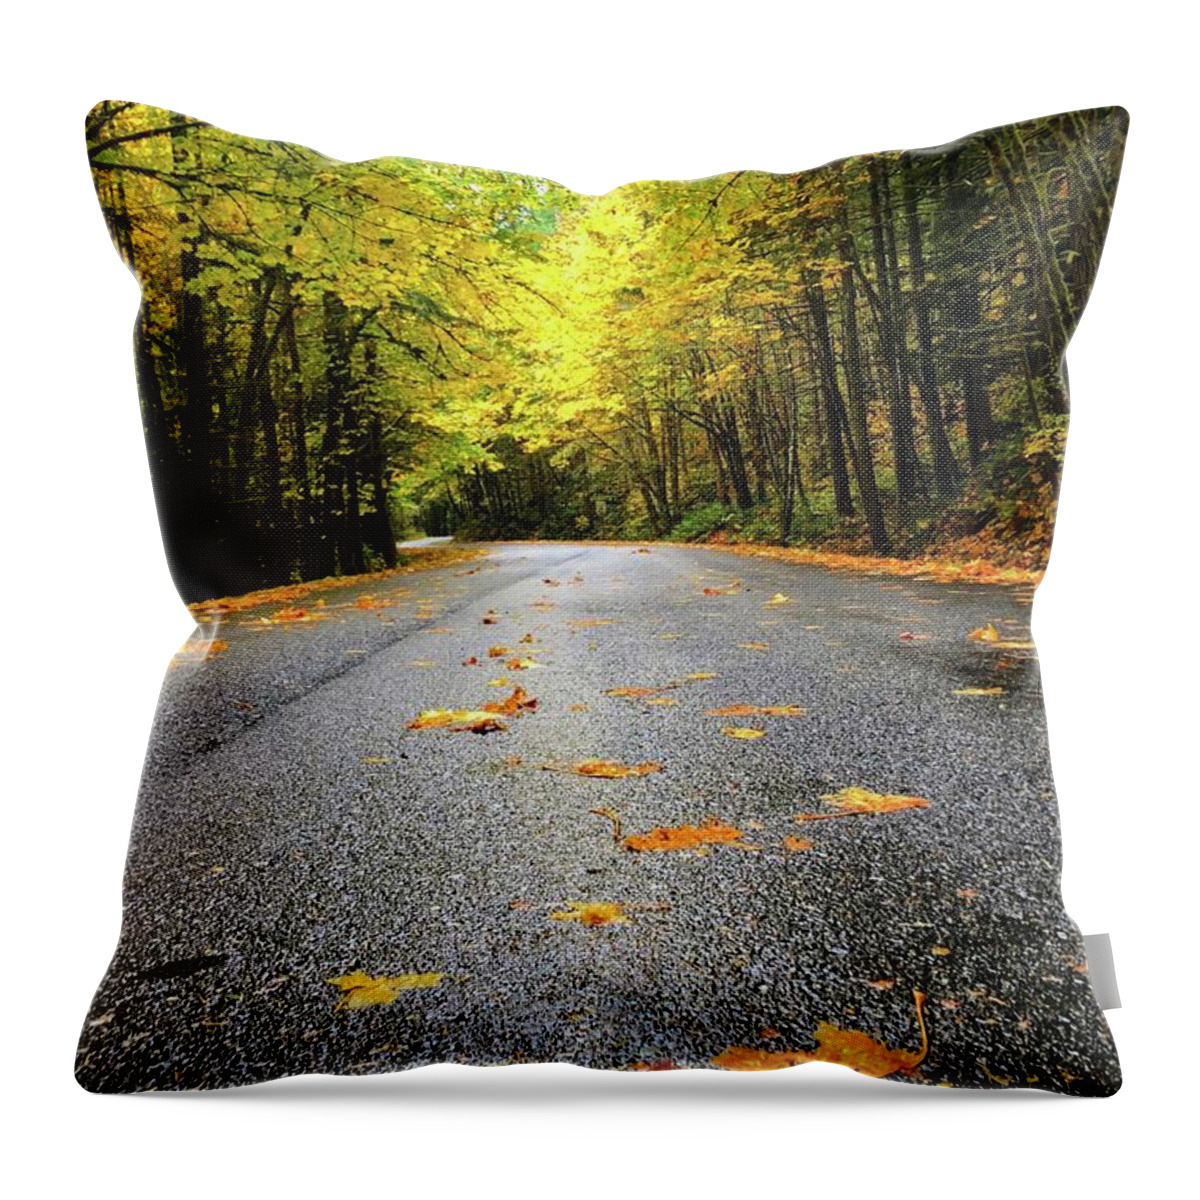 The Bright Yellows On The Fall Drive Were Stunning! Throw Pillow featuring the photograph Fall Drive by Brian Eberly